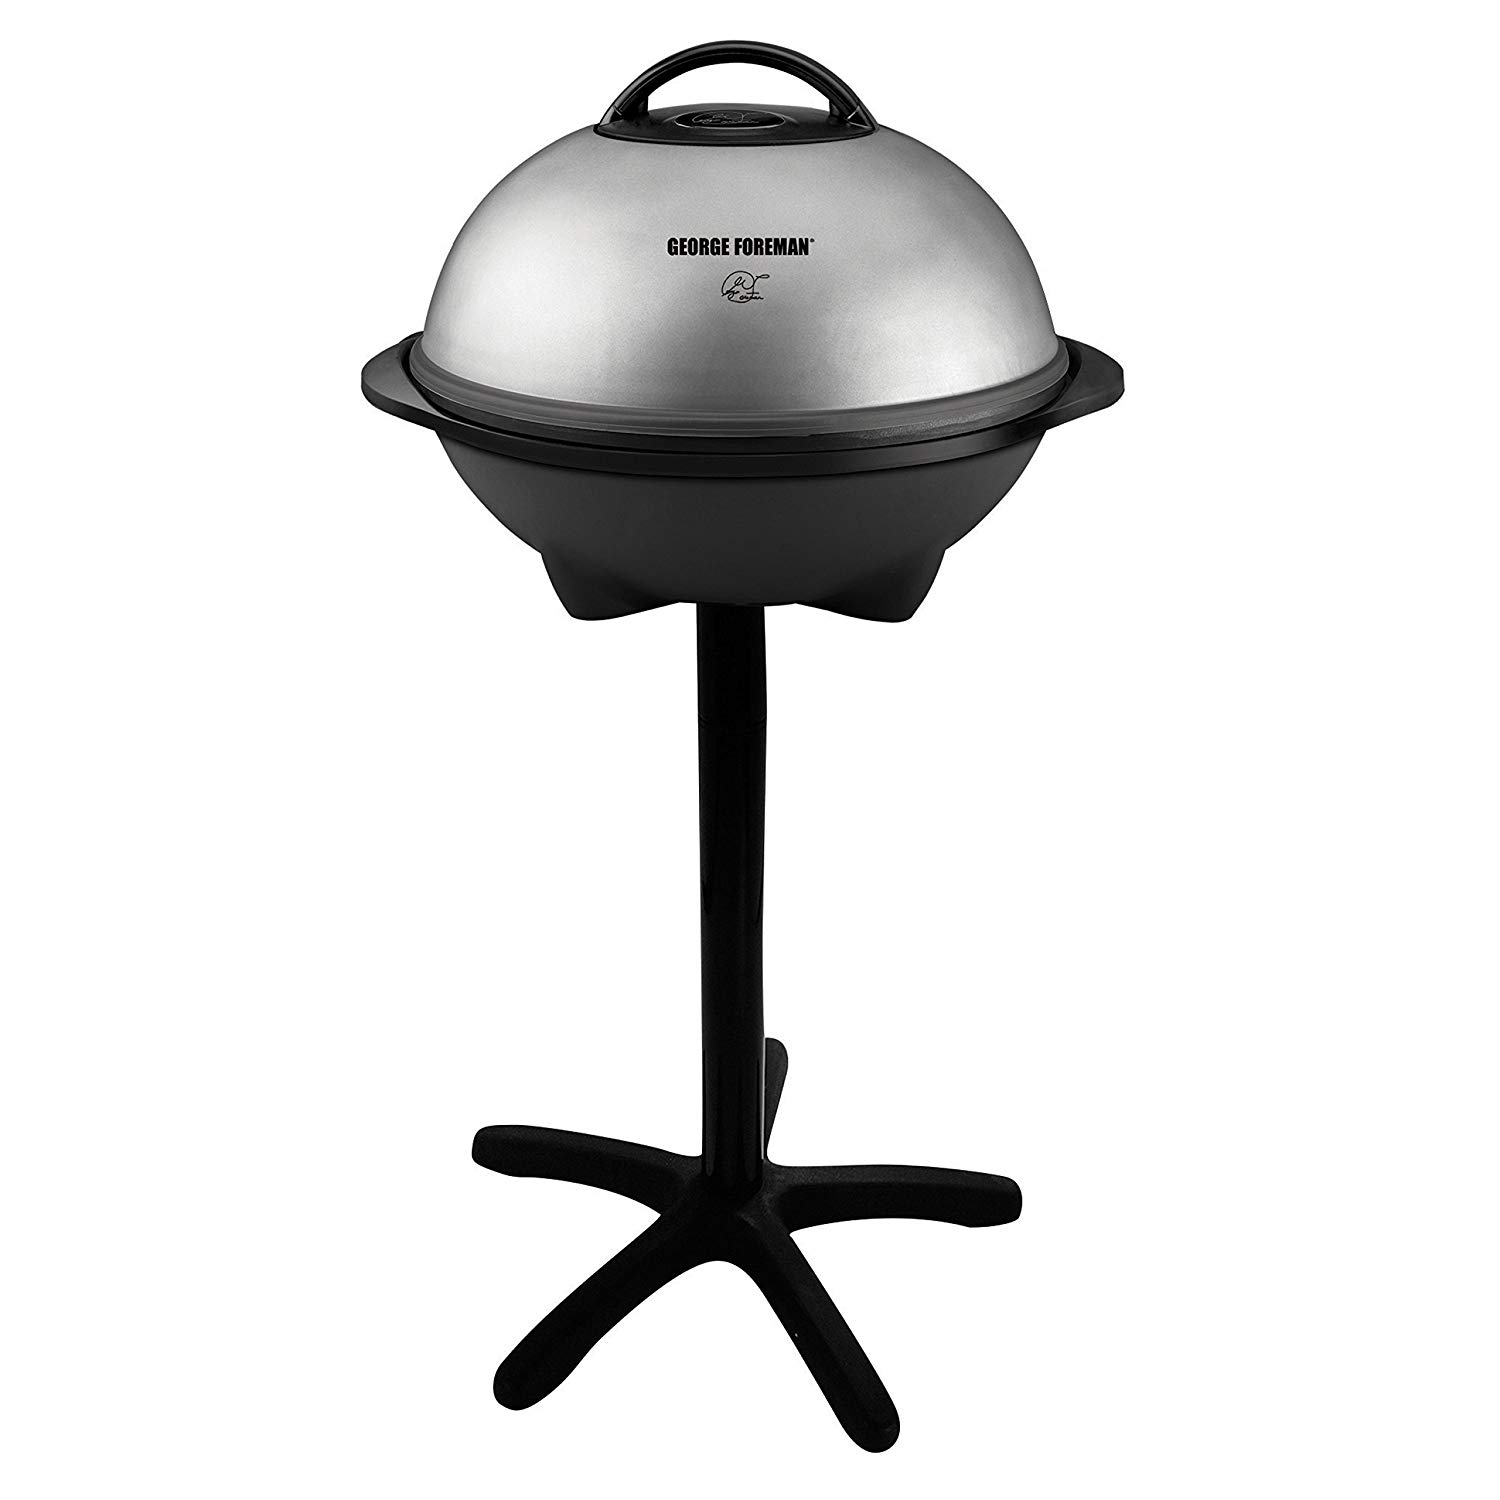 George Foreman Adjustable Temperature Electric BBQ Grill